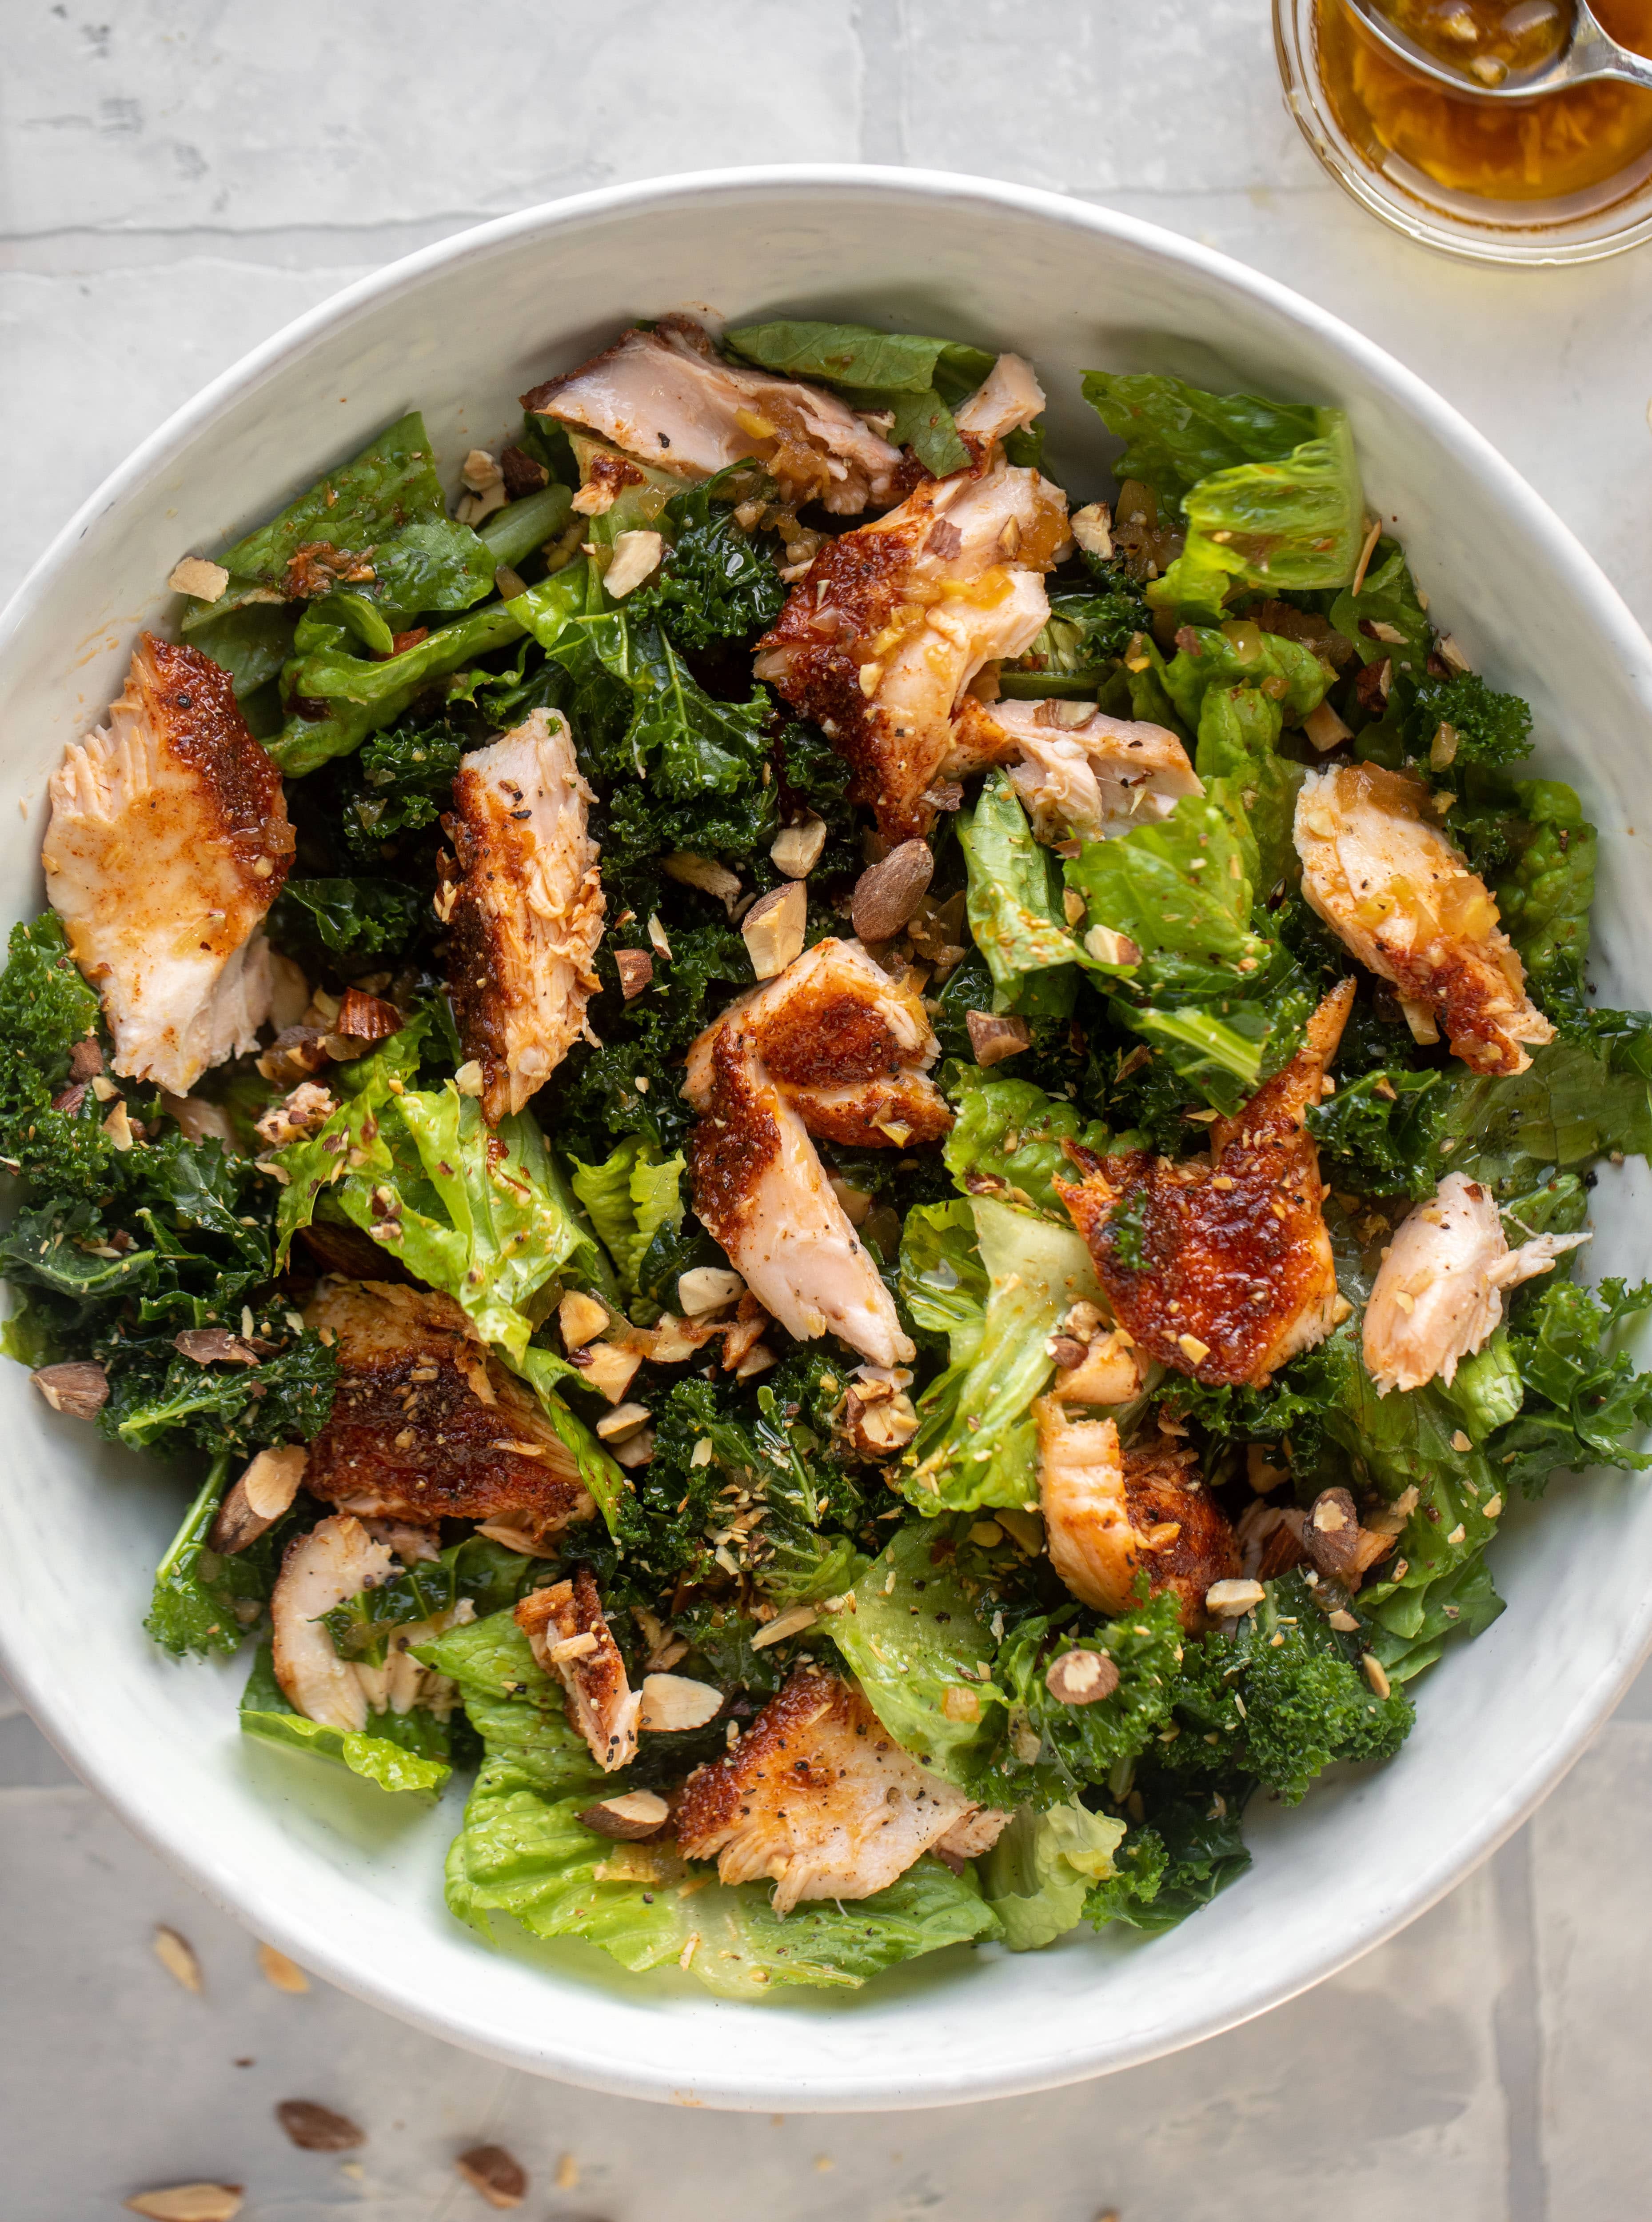 This ginger salmon salad has the flaky, flavorful roasted salmon on top of kale and romaine, drizzled with warm ginger vinaigrette. 